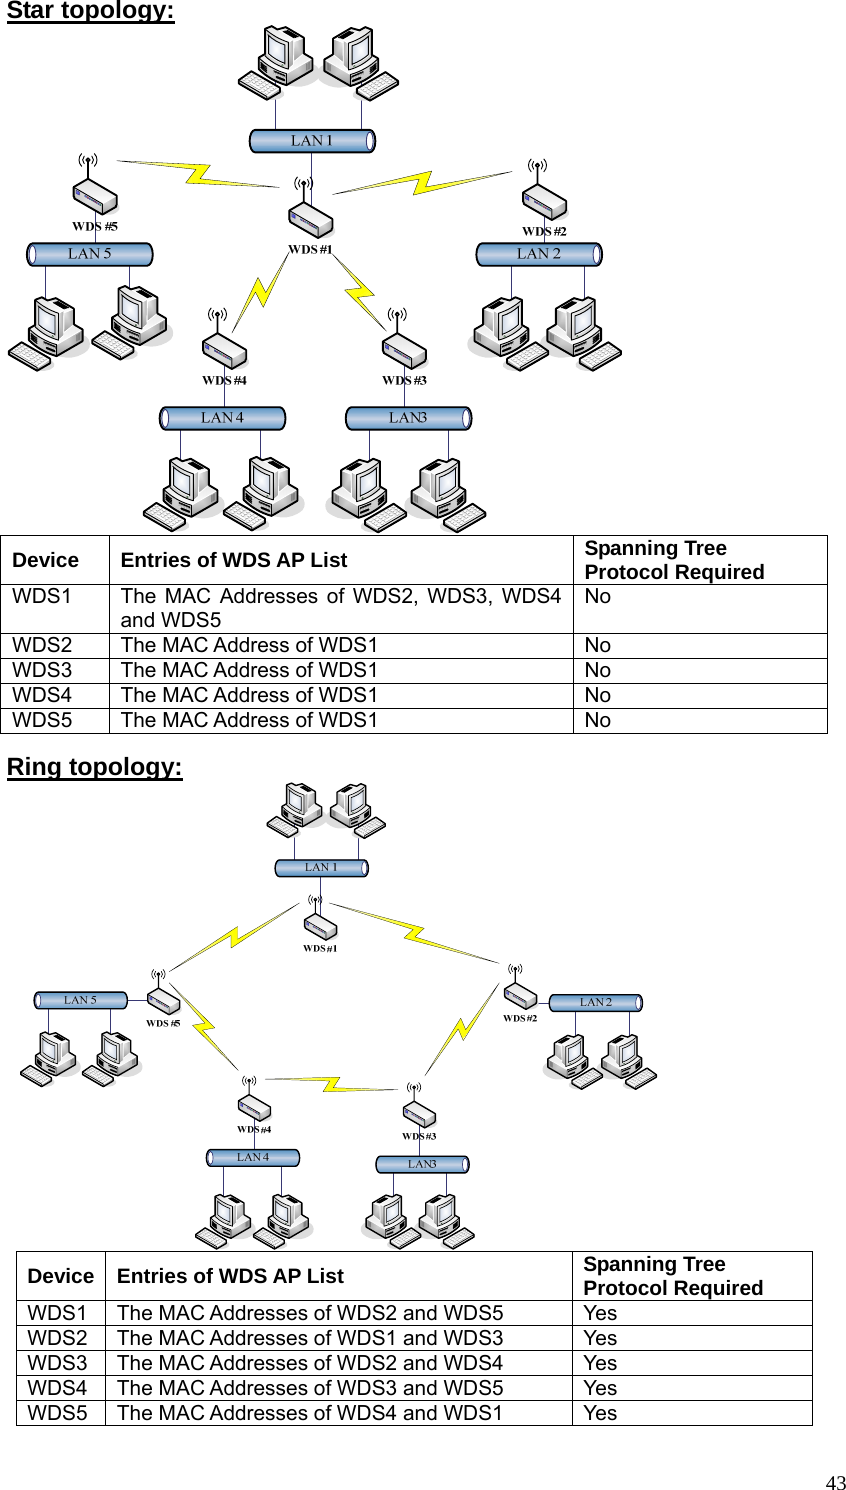  43Star topology:  Device  Entries of WDS AP List  Spanning Tree Protocol Required WDS1  The MAC Addresses of WDS2, WDS3, WDS4 and WDS5 No WDS2  The MAC Address of WDS1  No WDS3  The MAC Address of WDS1  No WDS4  The MAC Address of WDS1  No WDS5  The MAC Address of WDS1  No Ring topology:  Device  Entries of WDS AP List  Spanning Tree Protocol Required WDS1  The MAC Addresses of WDS2 and WDS5  Yes WDS2  The MAC Addresses of WDS1 and WDS3  Yes WDS3  The MAC Addresses of WDS2 and WDS4  Yes WDS4  The MAC Addresses of WDS3 and WDS5  Yes WDS5  The MAC Addresses of WDS4 and WDS1  Yes 